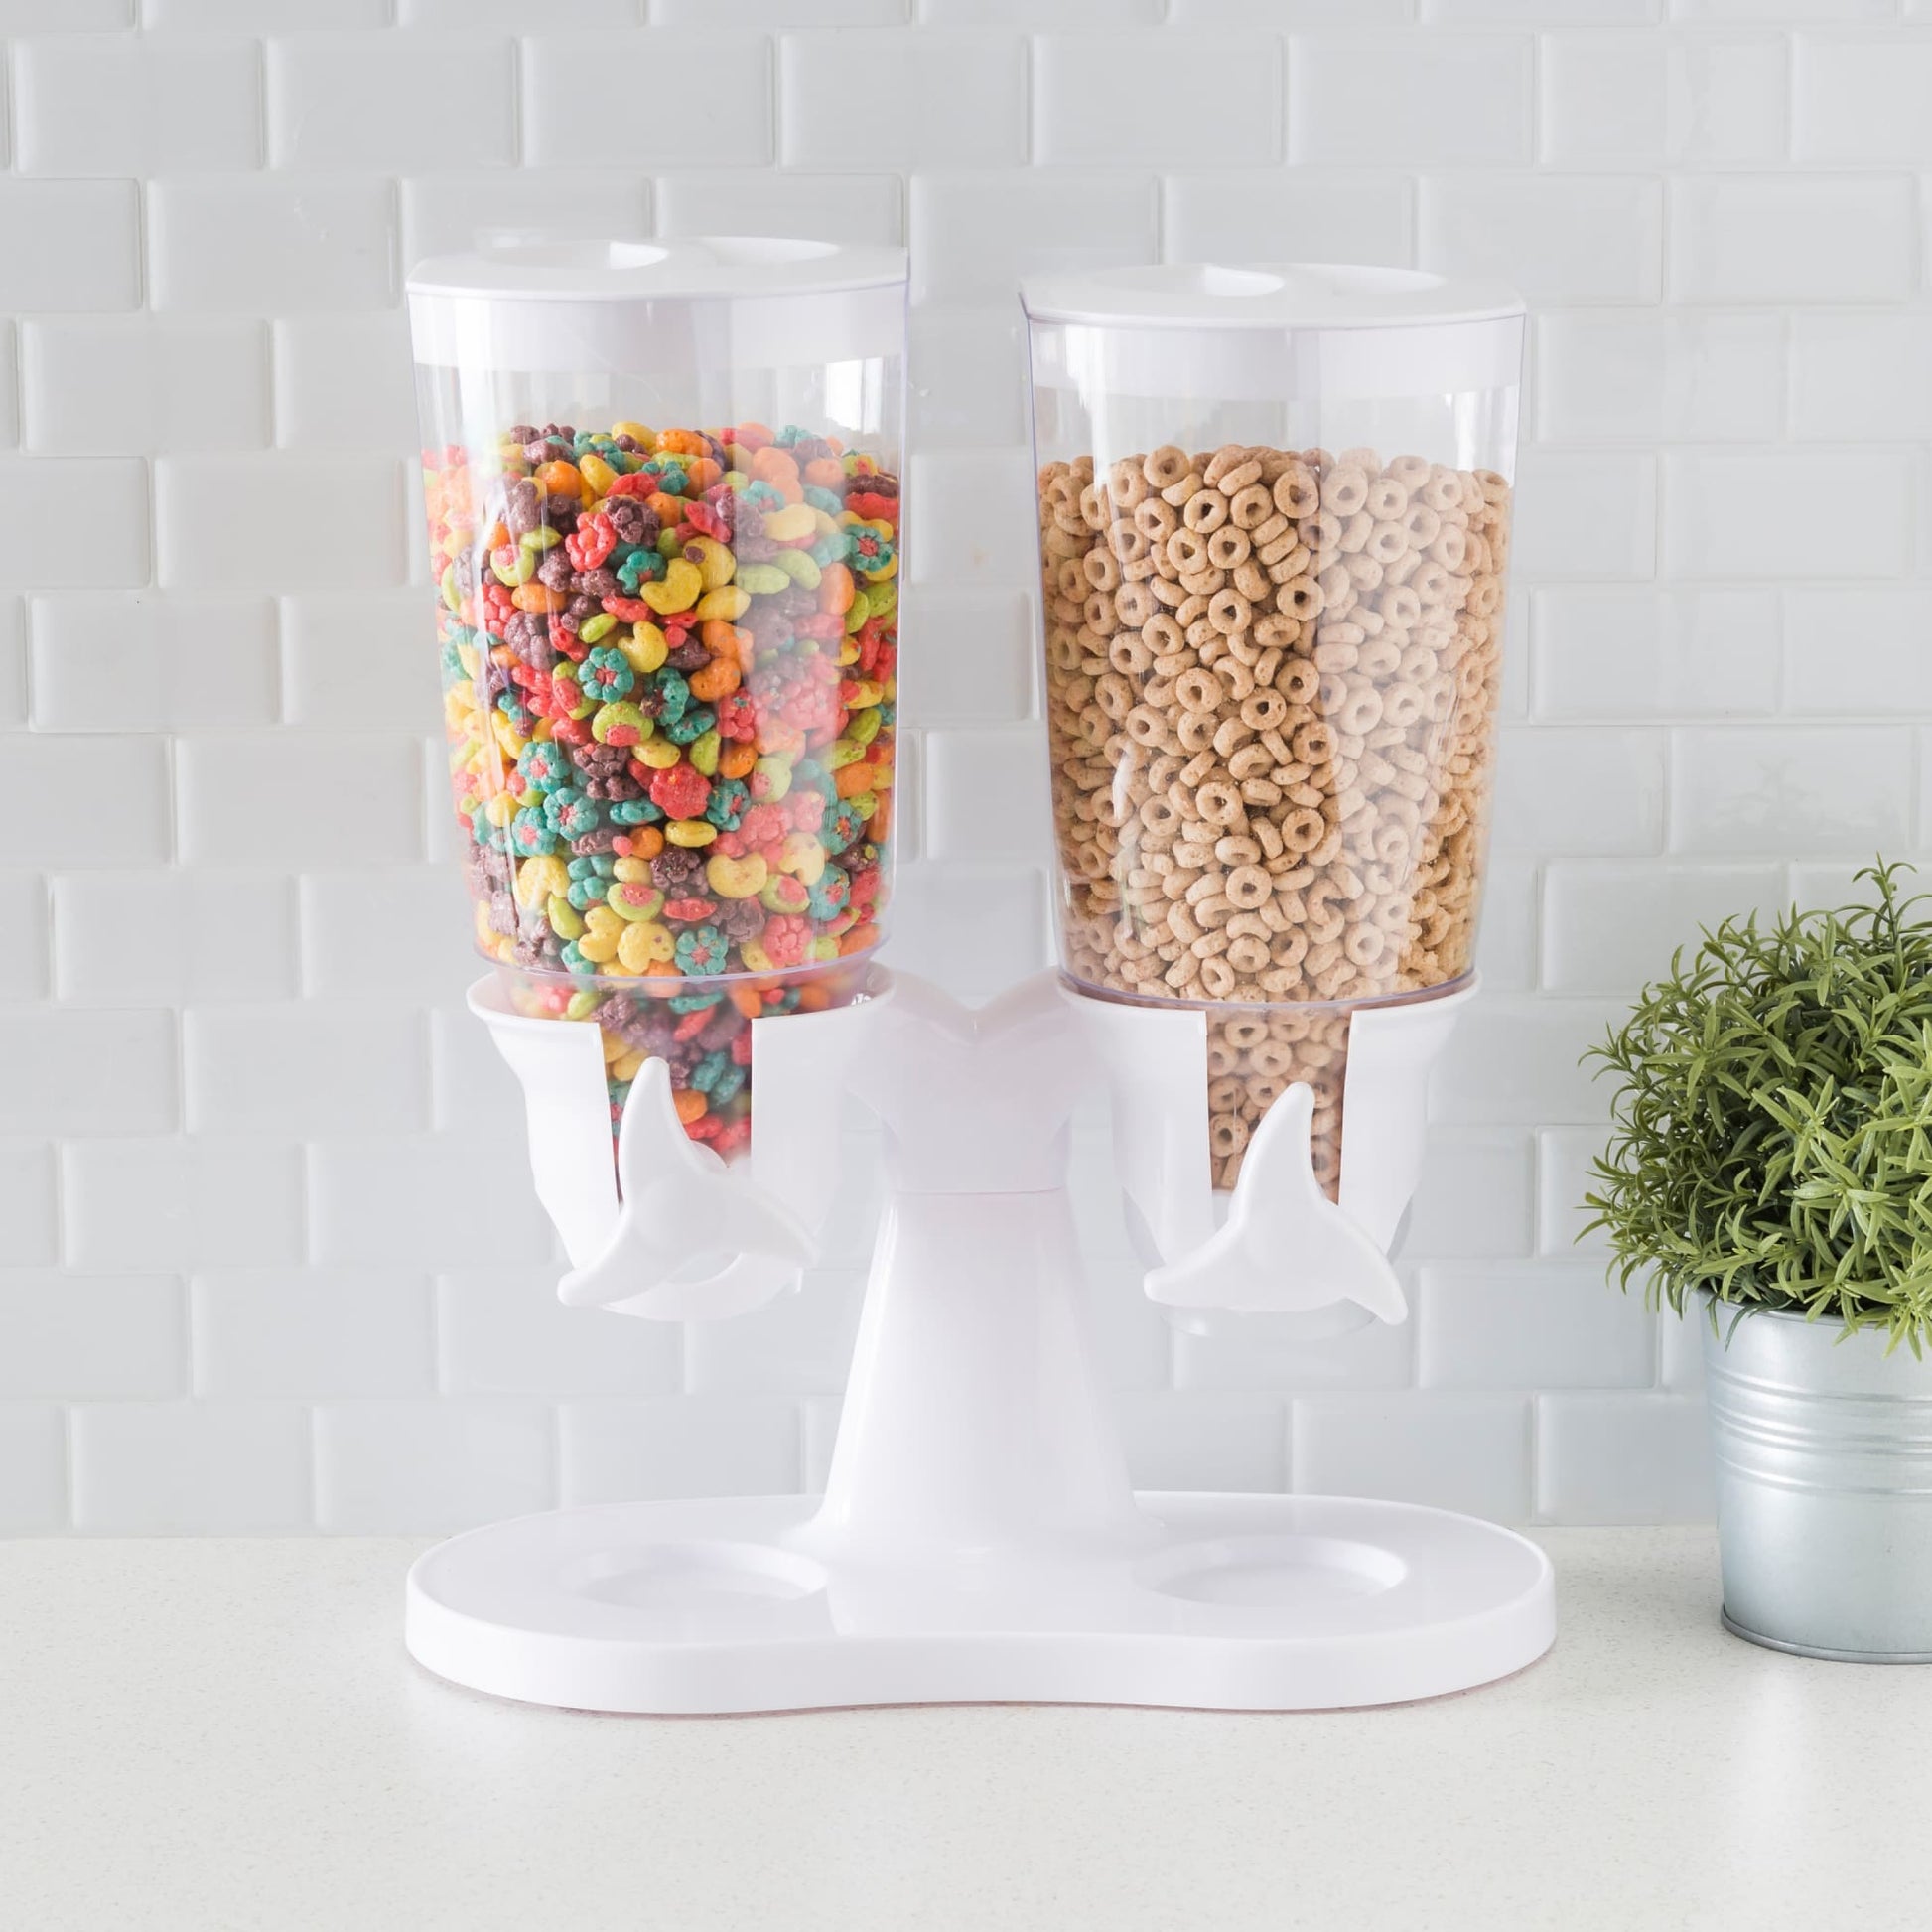 Cereal Dispensers - Double Cereal Dispenser - 7345MW117